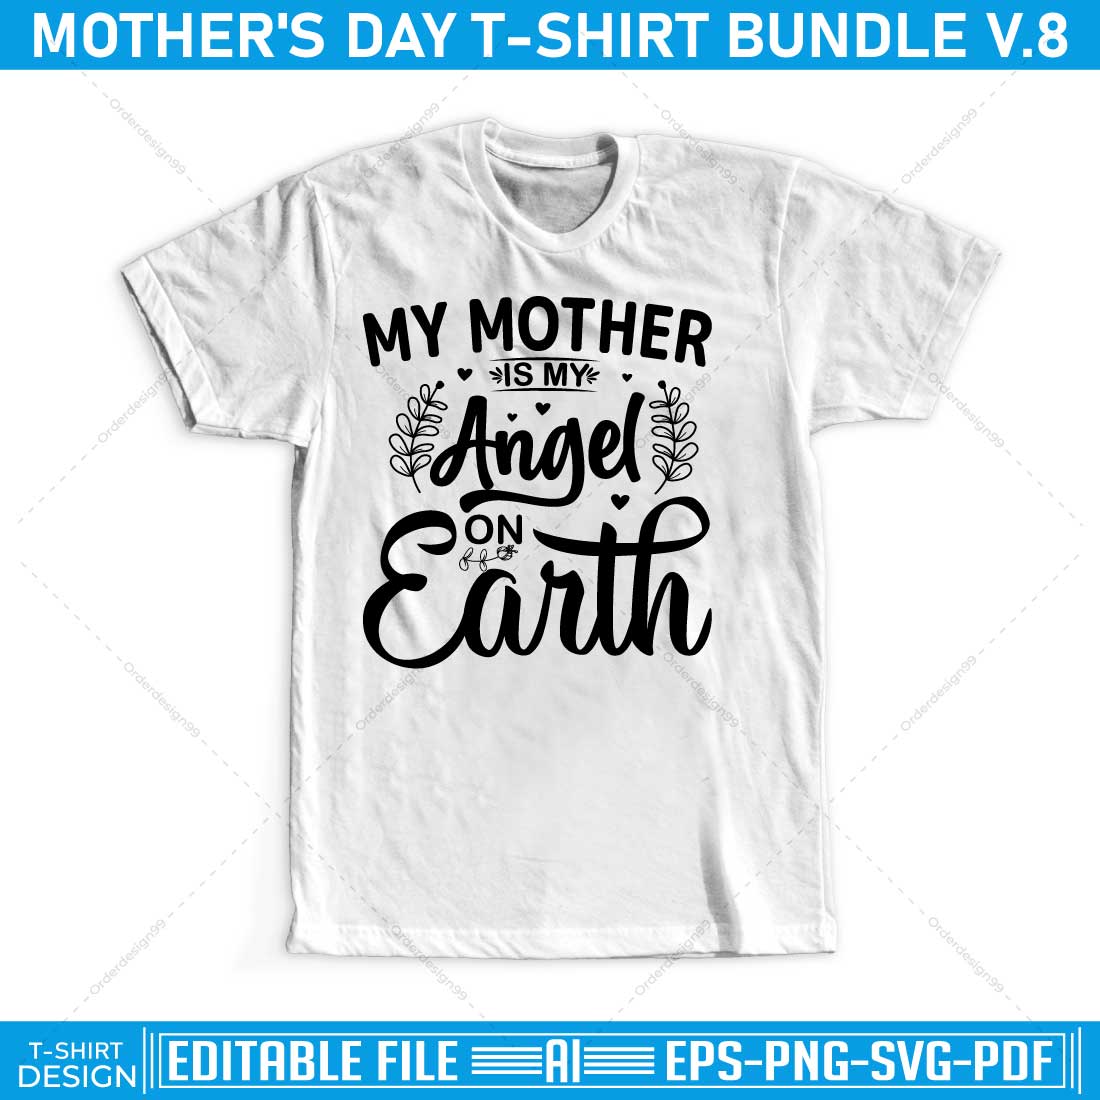 Mother's Day T-shirt Bundle V8 preview image.